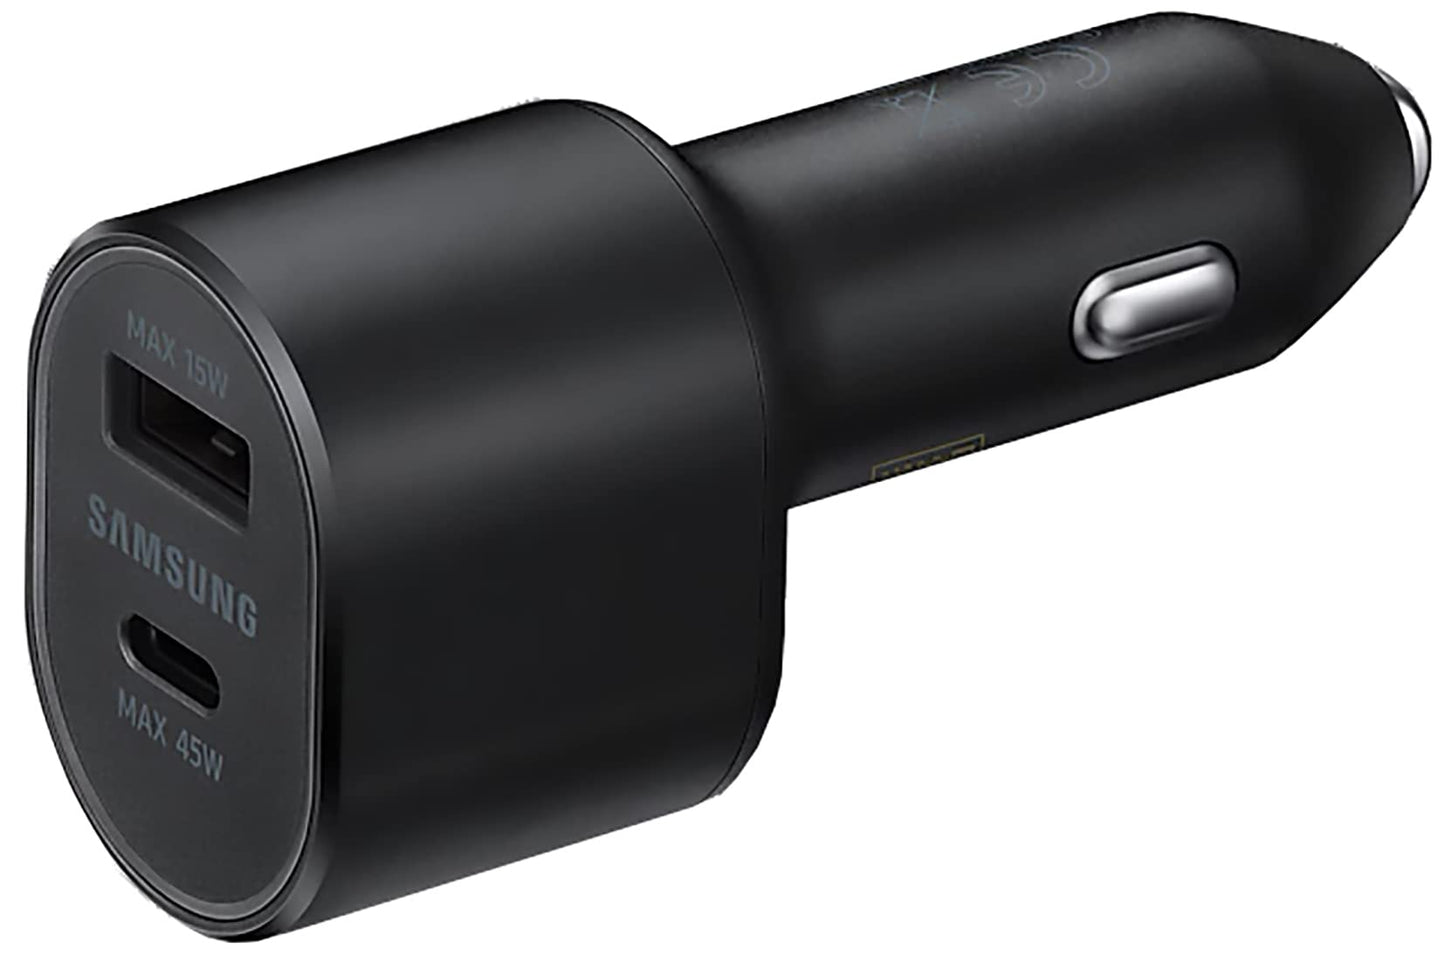 SAMSUNG Super Fast Dual Car Charger